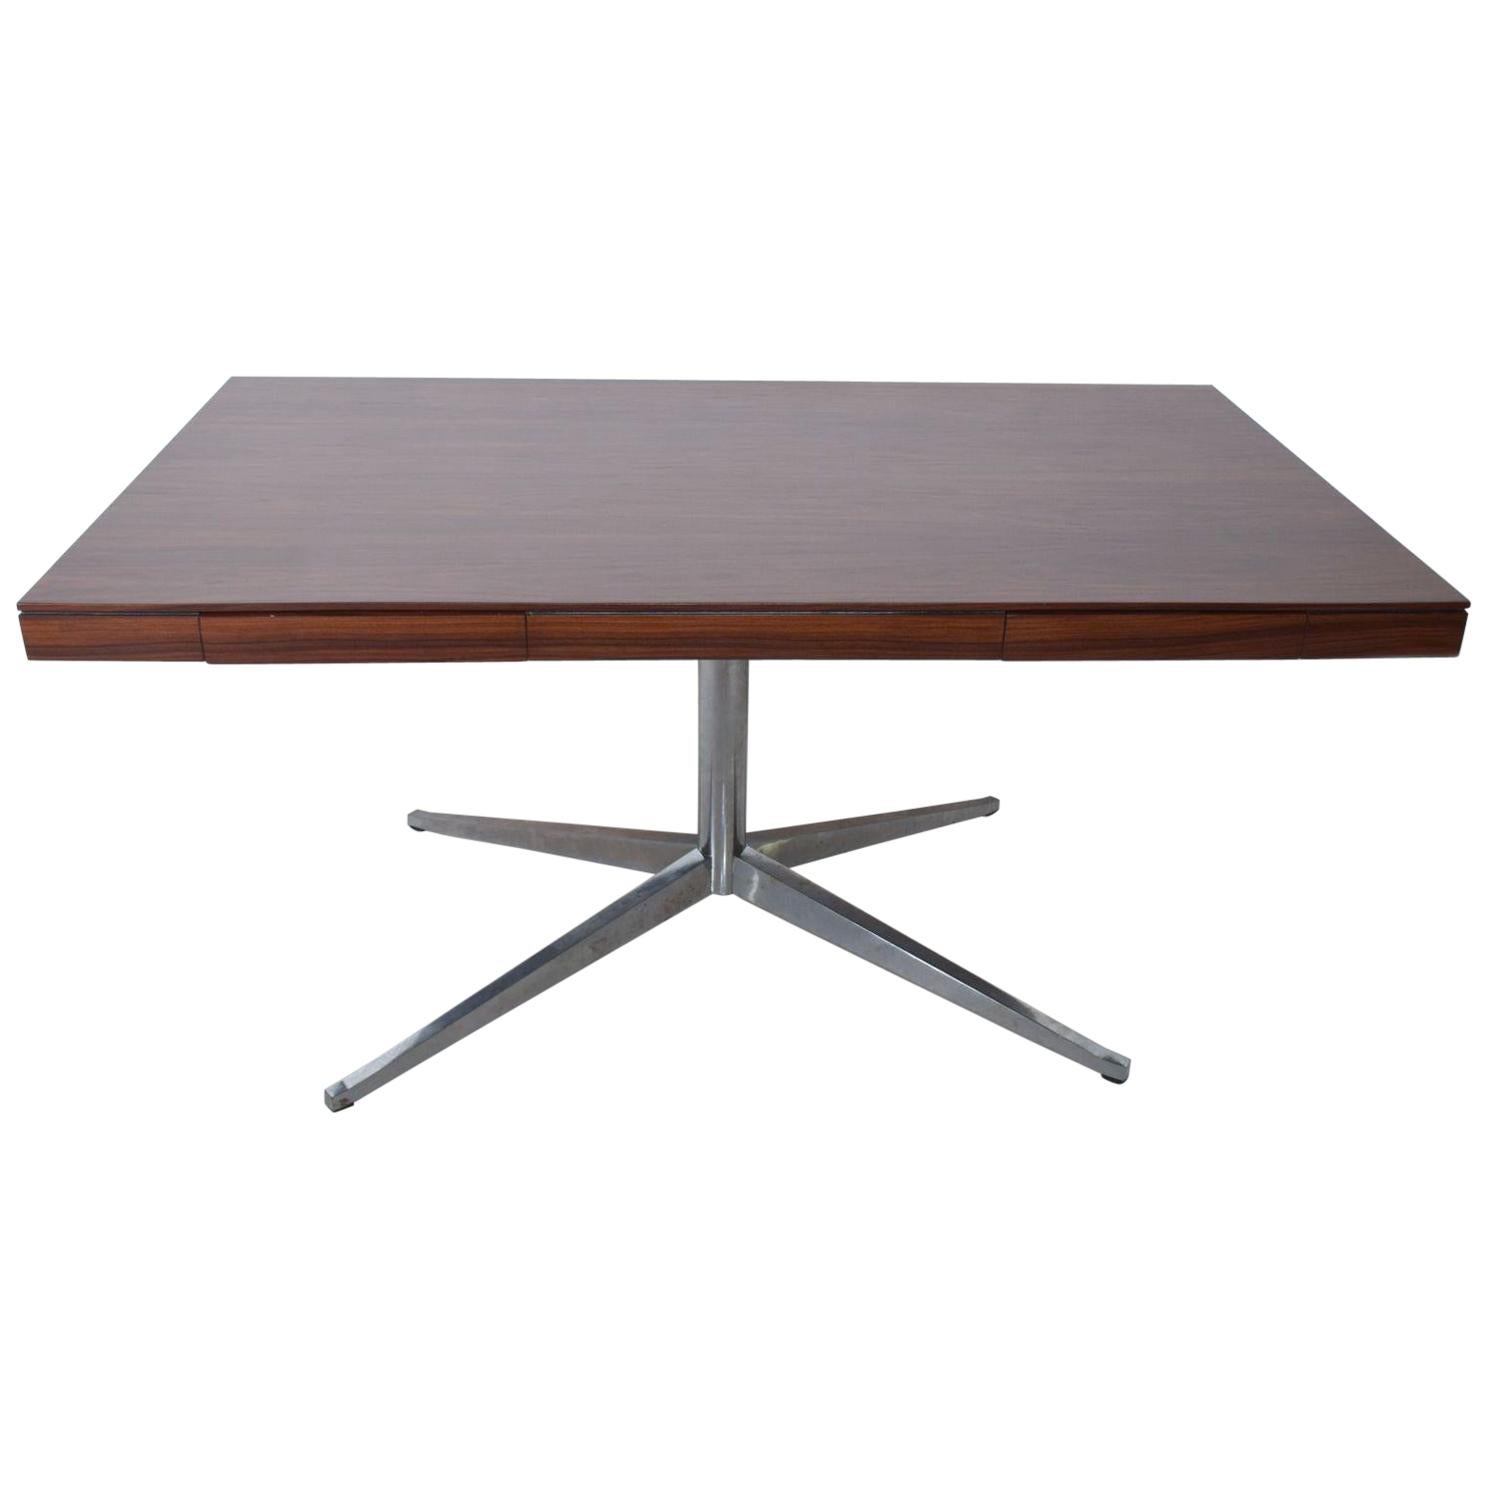 Florence KNOLL Executive Partners DESK Rosewood w/ Chrome Legs Refined Classic